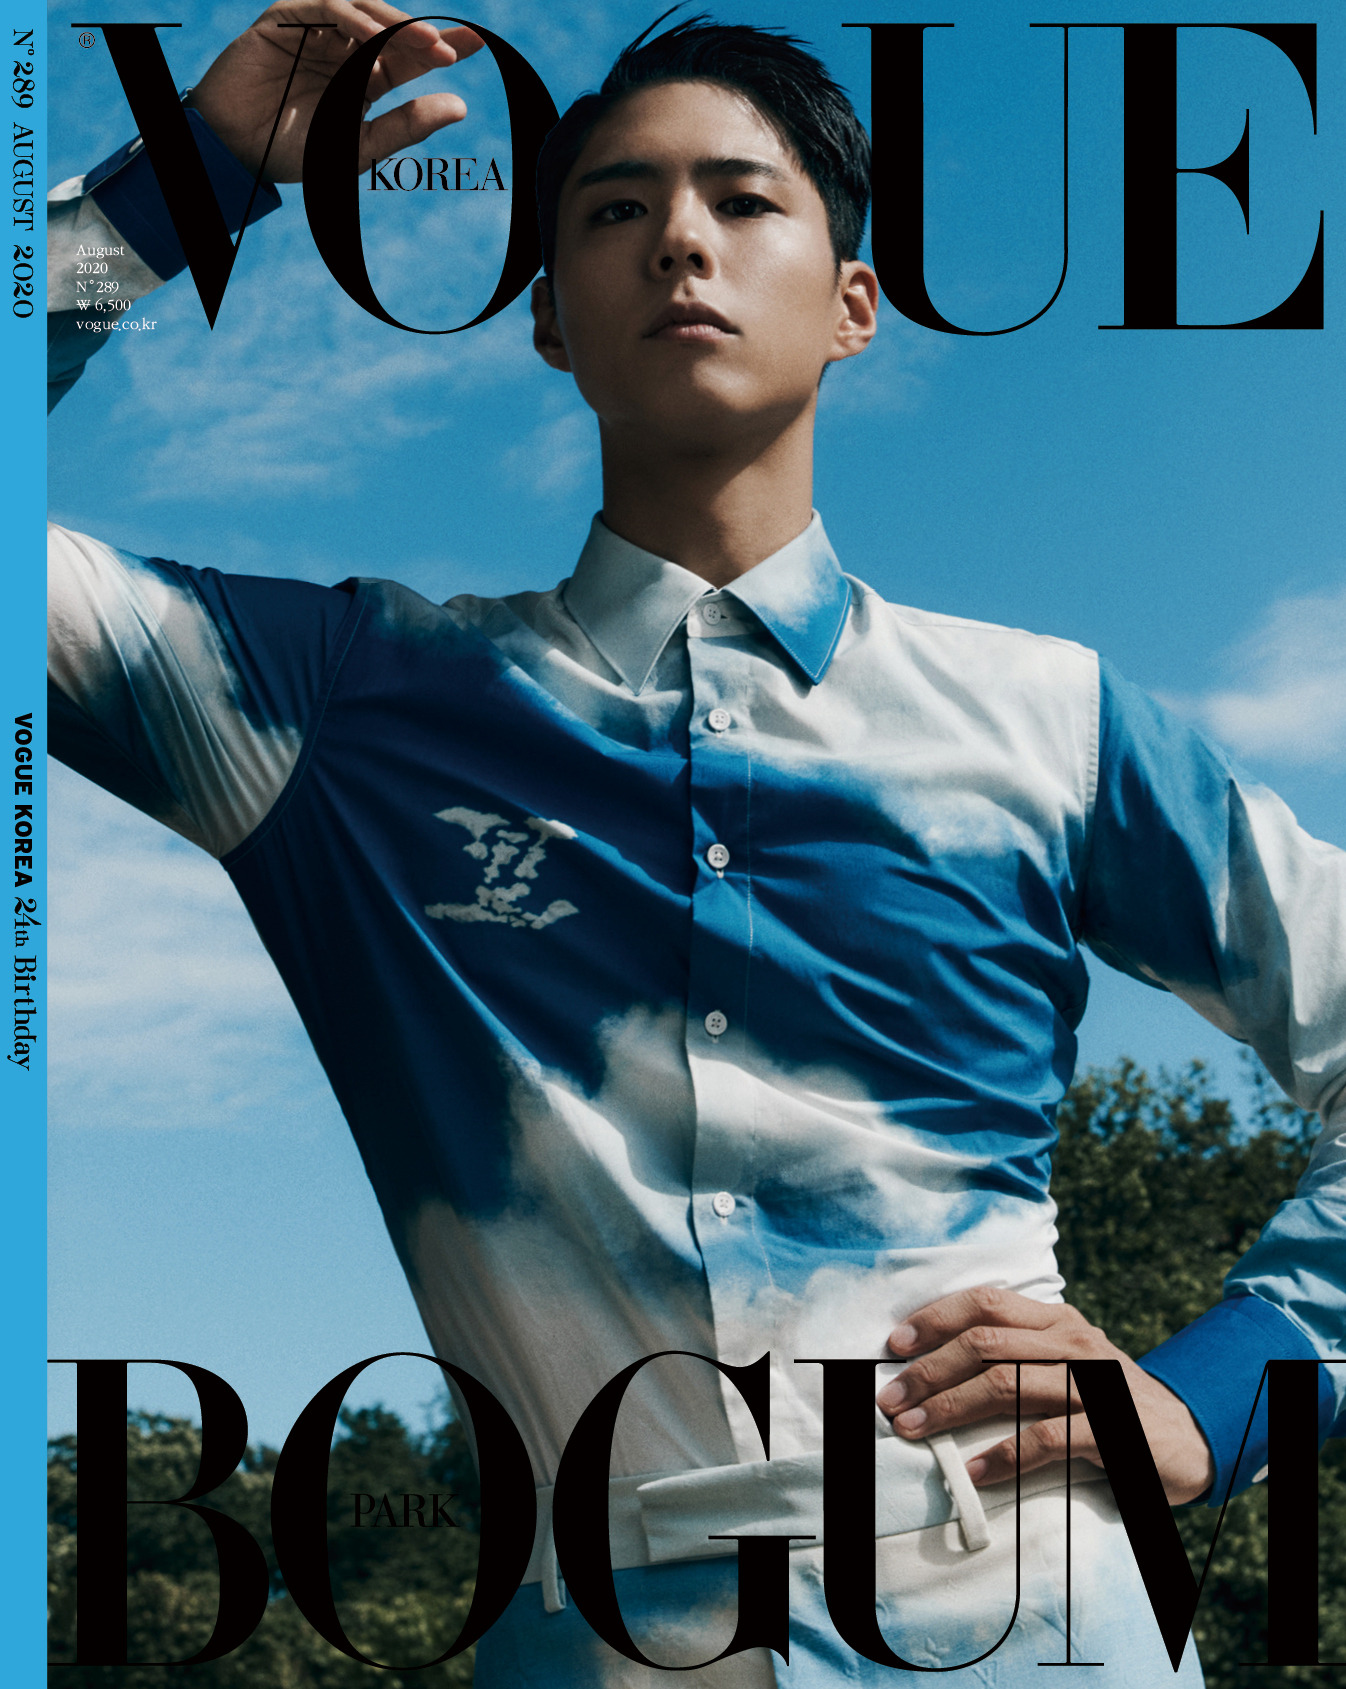 Seoul:) = Actor Park Bo-gum took off his boyhood and emanated a deadly masculine beauty.Park Bo-gum has covered the cover of the first issue of Vogue Koreas 24th anniversary, a fashion magazine published on the 20th.Park Bo-gum hosted the shoot at Changdeokgung.The premiere beauty of the palace and the understated masculine beauty of Park Bo-gum combined to create an emotional visual that seems to be watching a movie on the other hand.Park Bo-gum is said to have maximized the perfection of the picture by overwhelming his gaze with his charisma by freely digesting various styles.Through the interview, I also talked about the truthful stories about the thoughts and values ​​of twenty-eight Park Bo-gum.An official said, Park Bo-gums proposal to spread the beauty of Korea has made me shoot at Changdeokgung. Park Bo-gum is a warm and caring inner owner, but he is more cool professional than anyone else in his work. Meanwhile, Park Bo-gums Vogue Korea pictorial and Interview have been published in Korea, Taiwan, Thailand, Hong Kong, Vogue ME and Chinese Vogue ME, and have proved the power of Park Bo-gum, which captivated Asia.